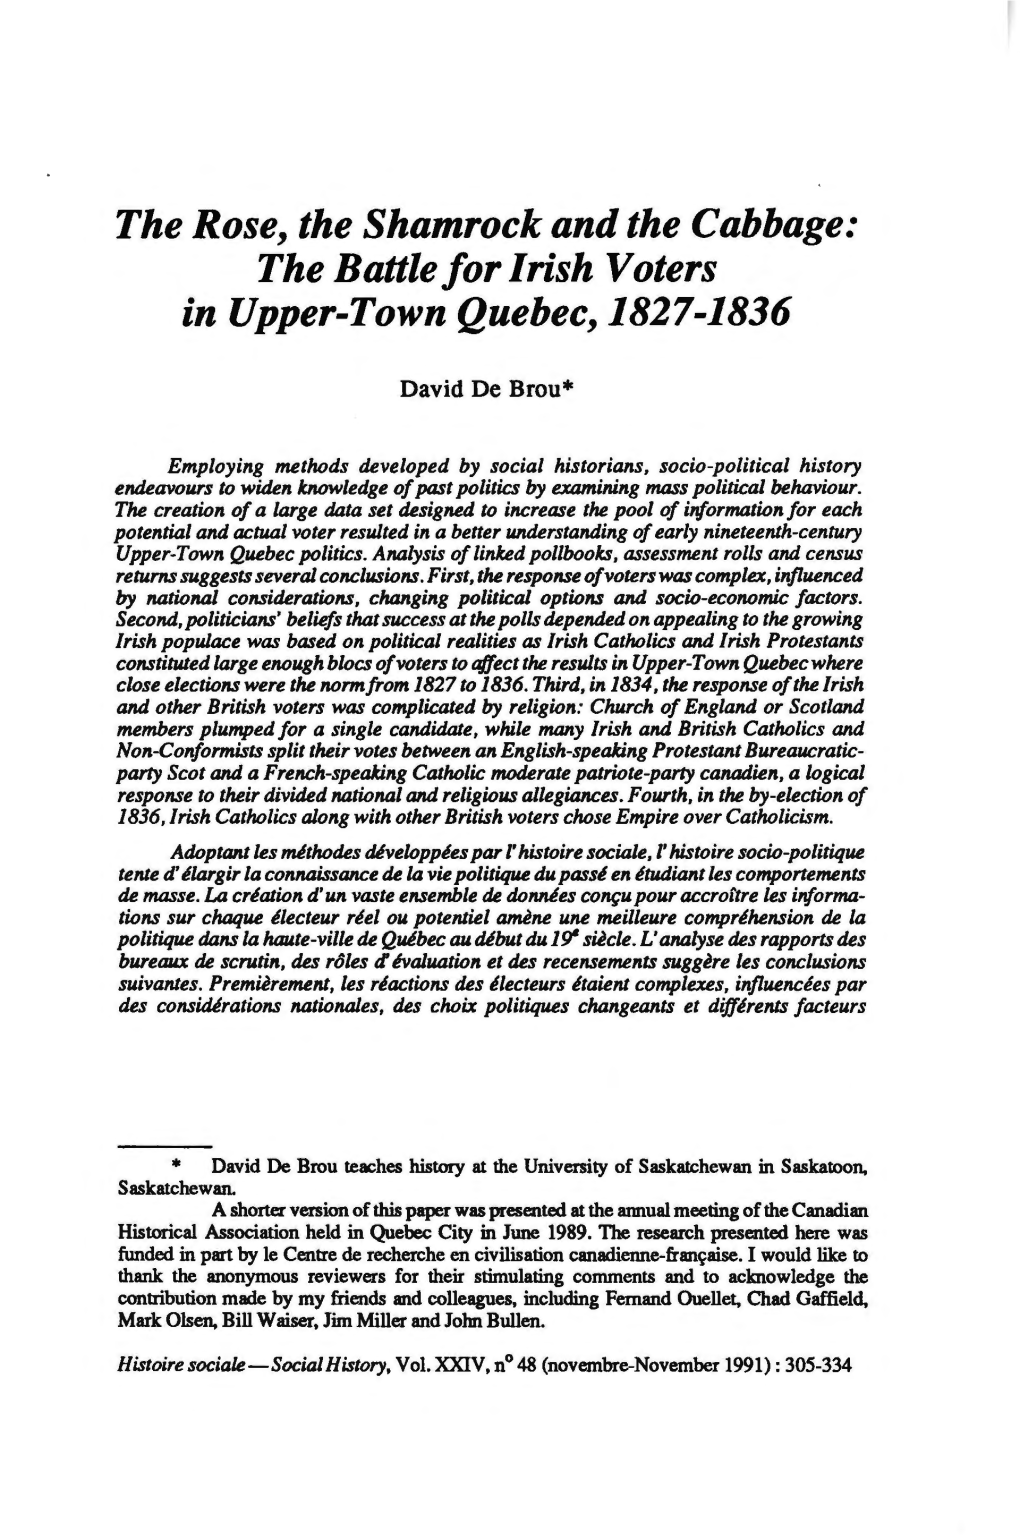 The Battle for Irish Voters in Upper-Town Quebec, 1827-1836